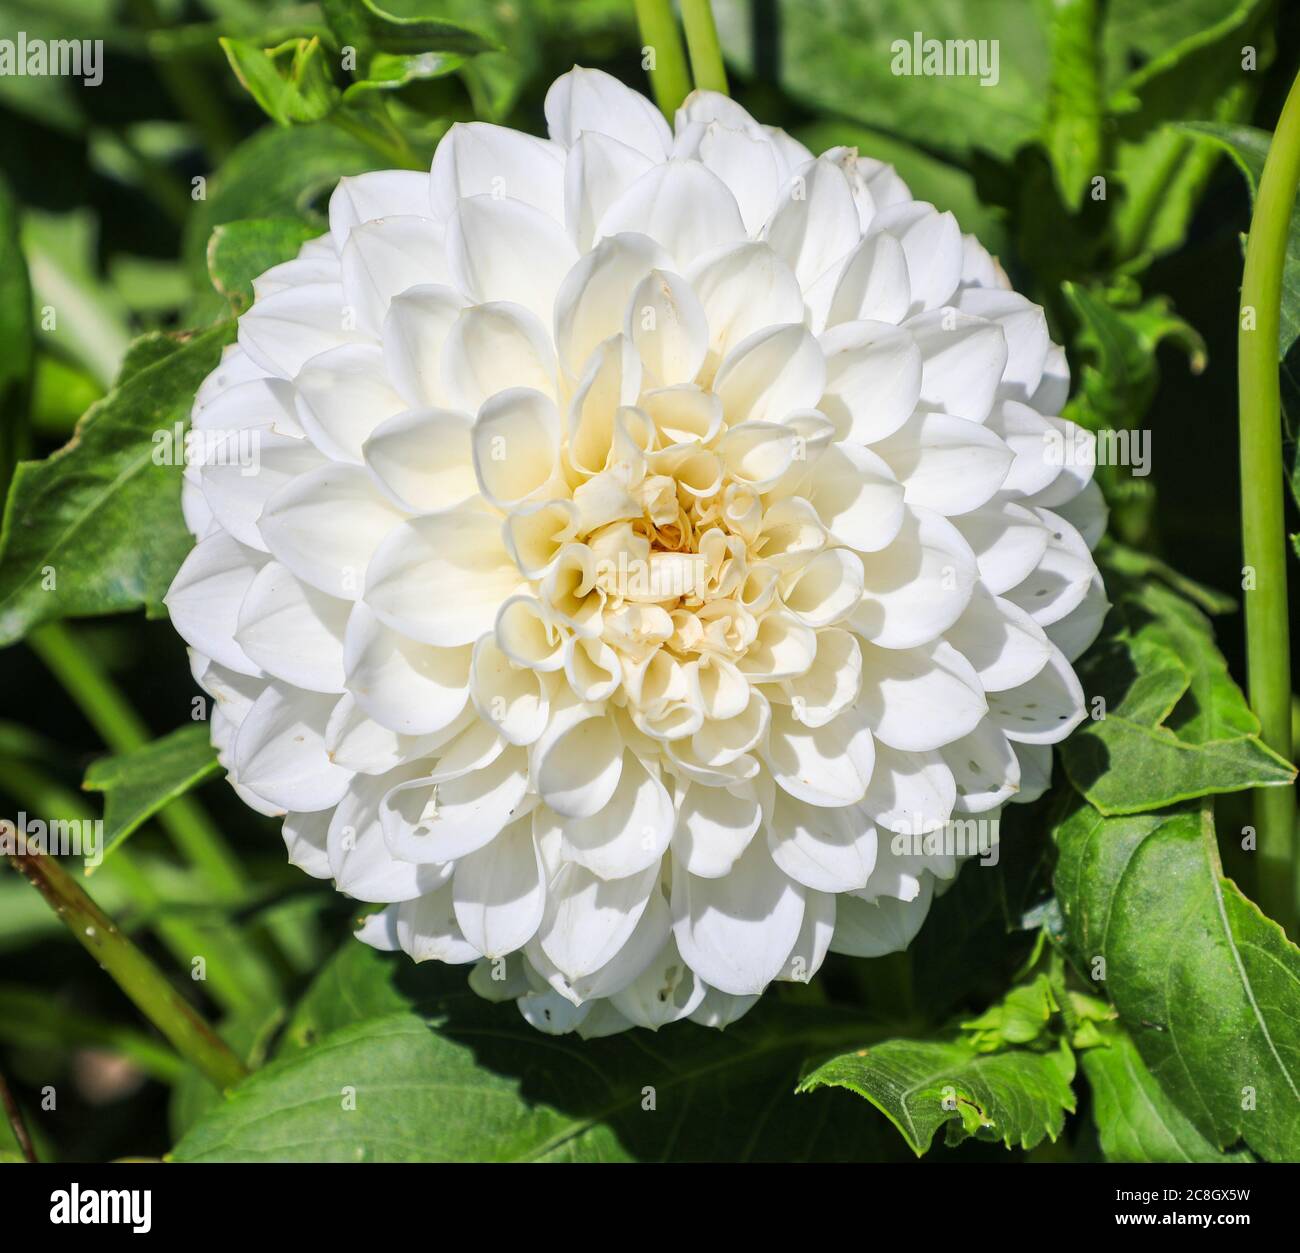 Close up shot of a white flower head of a Dahlia 'Abridge Taffy' at the National Dahlia Collection, Penzance, Cornwall, England Stock Photo